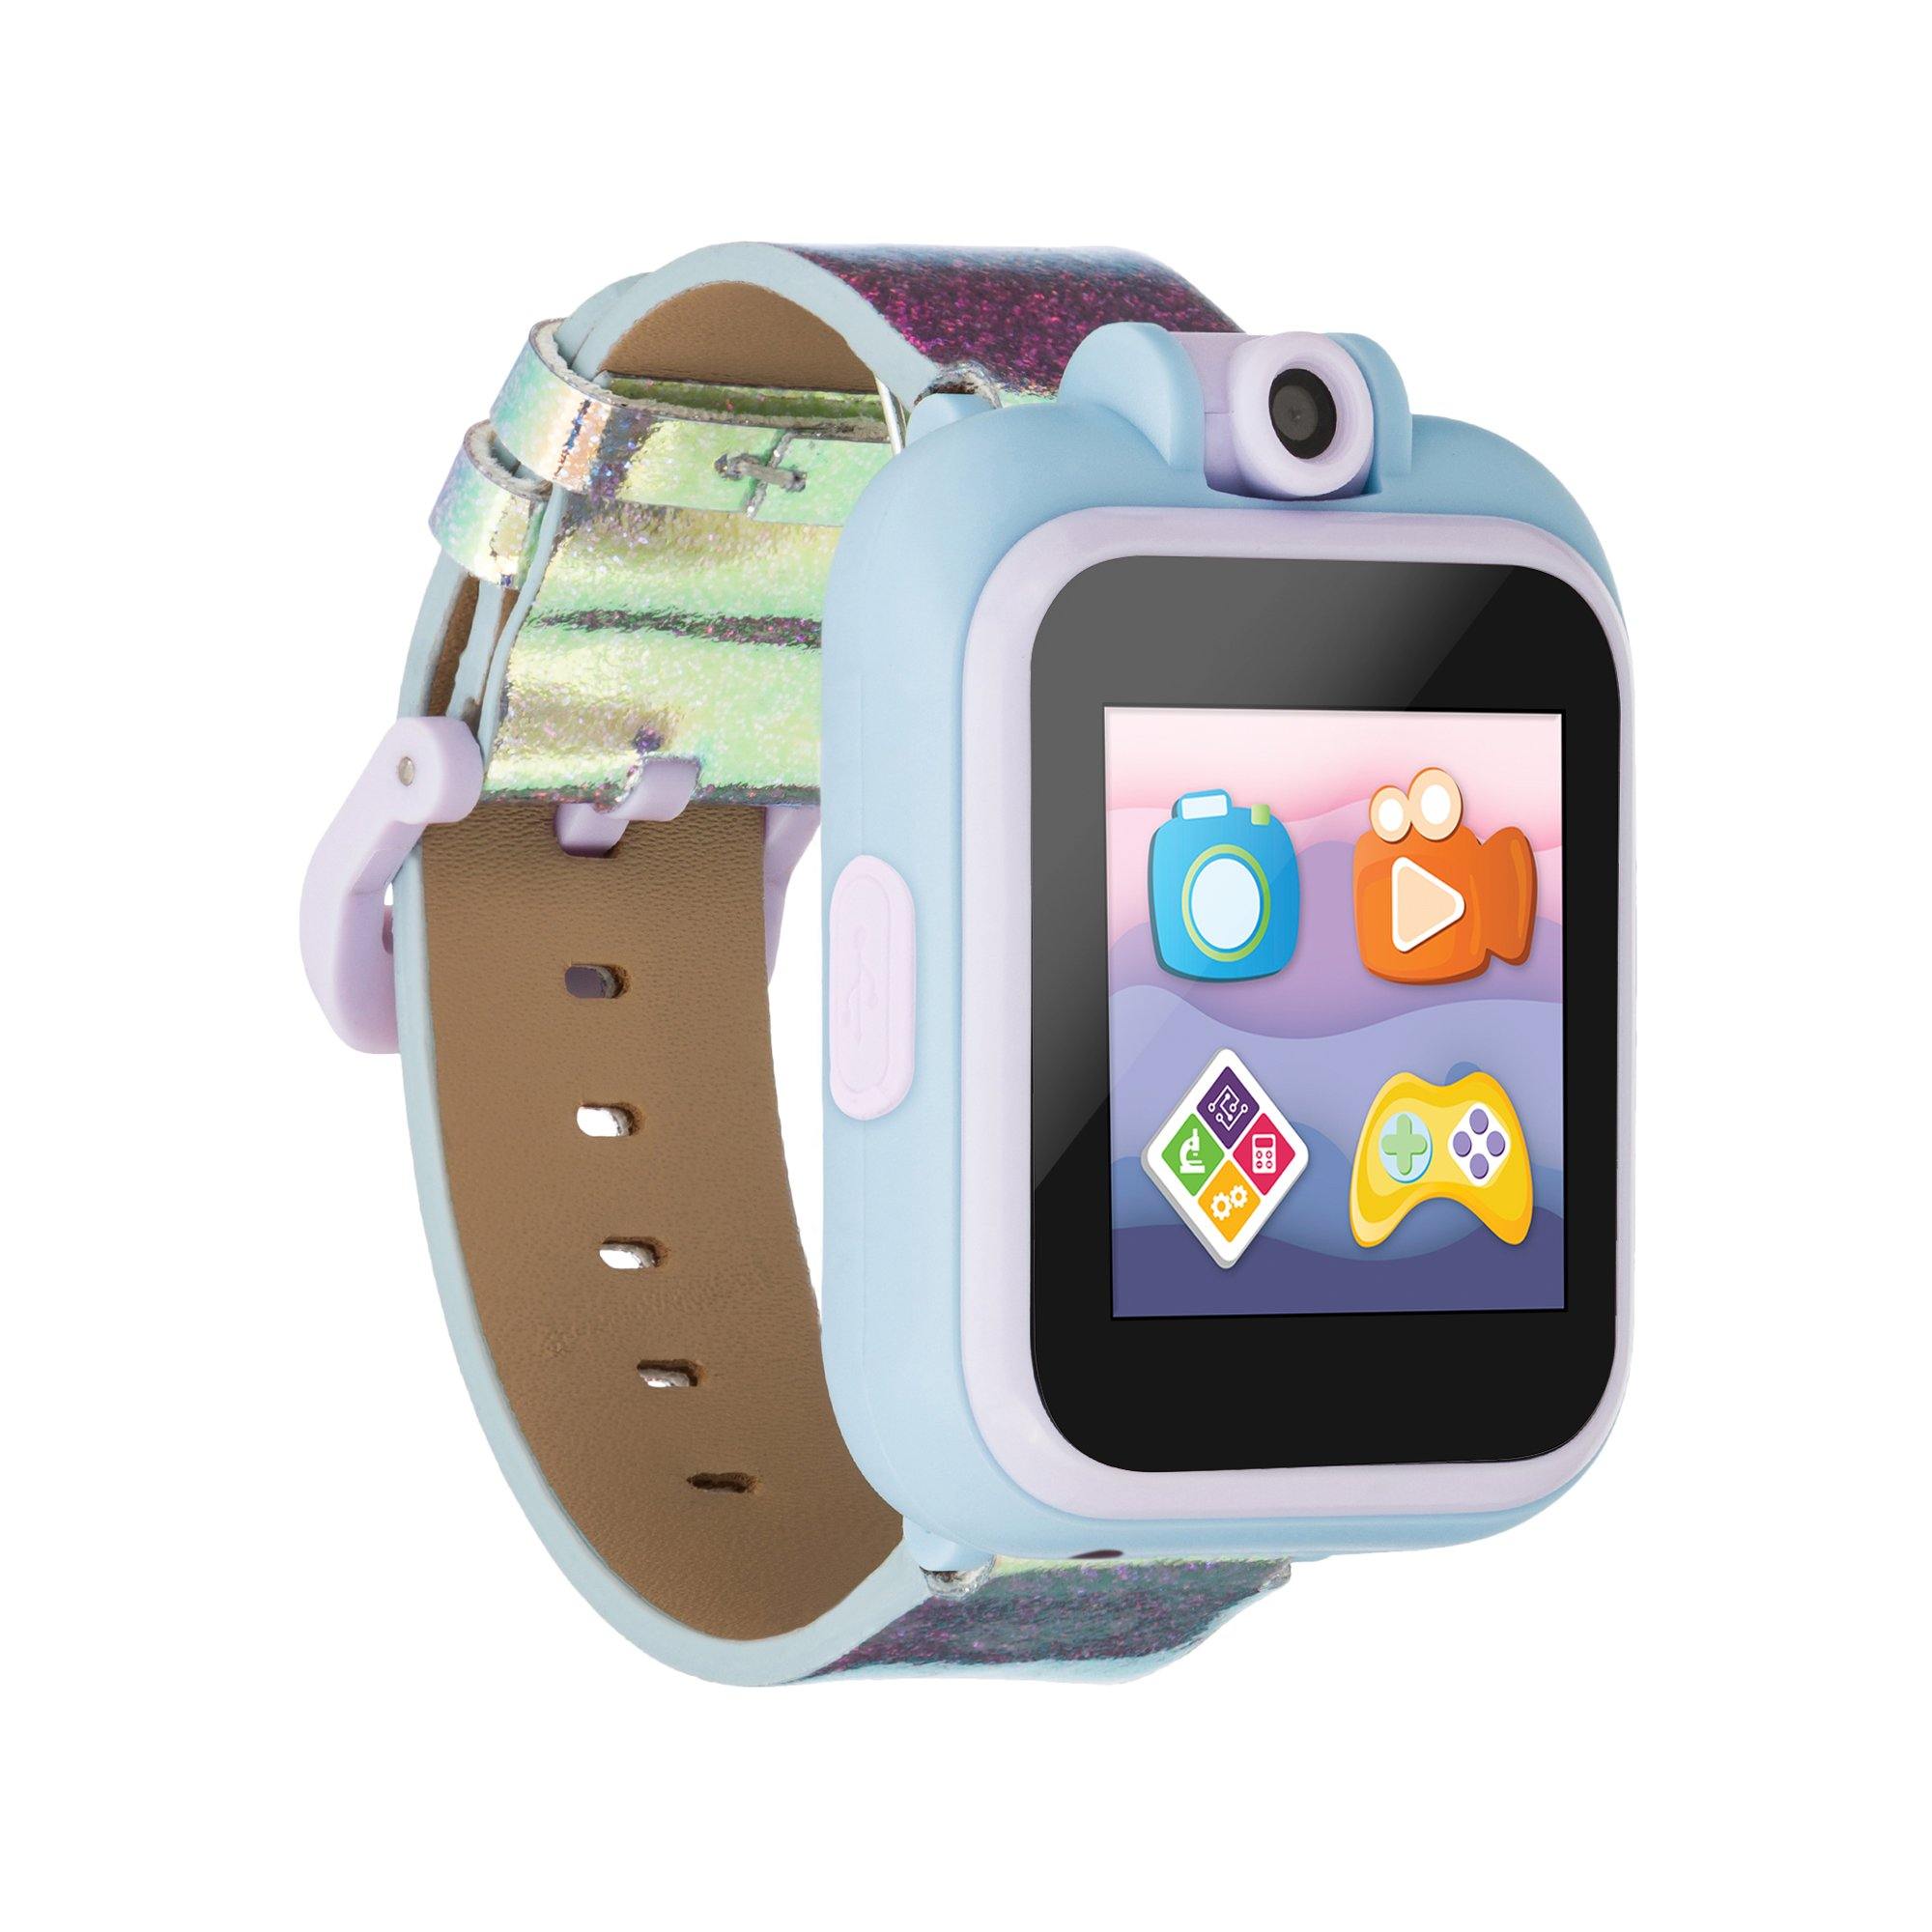 PlayZoom 2 Kids Smartwatch: Holographic affordable smart watch